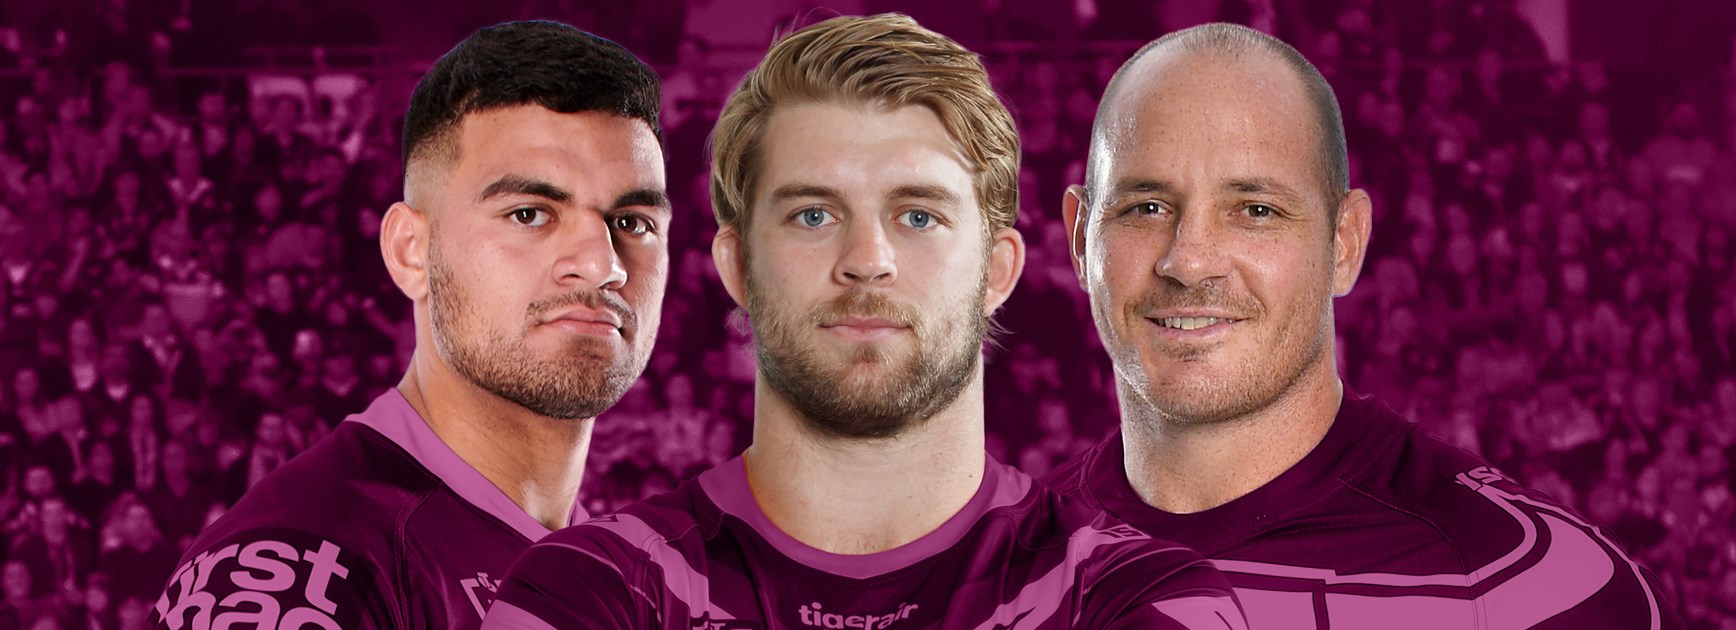 Renouf's Maroons side: I'd bring in young guns and hard heads